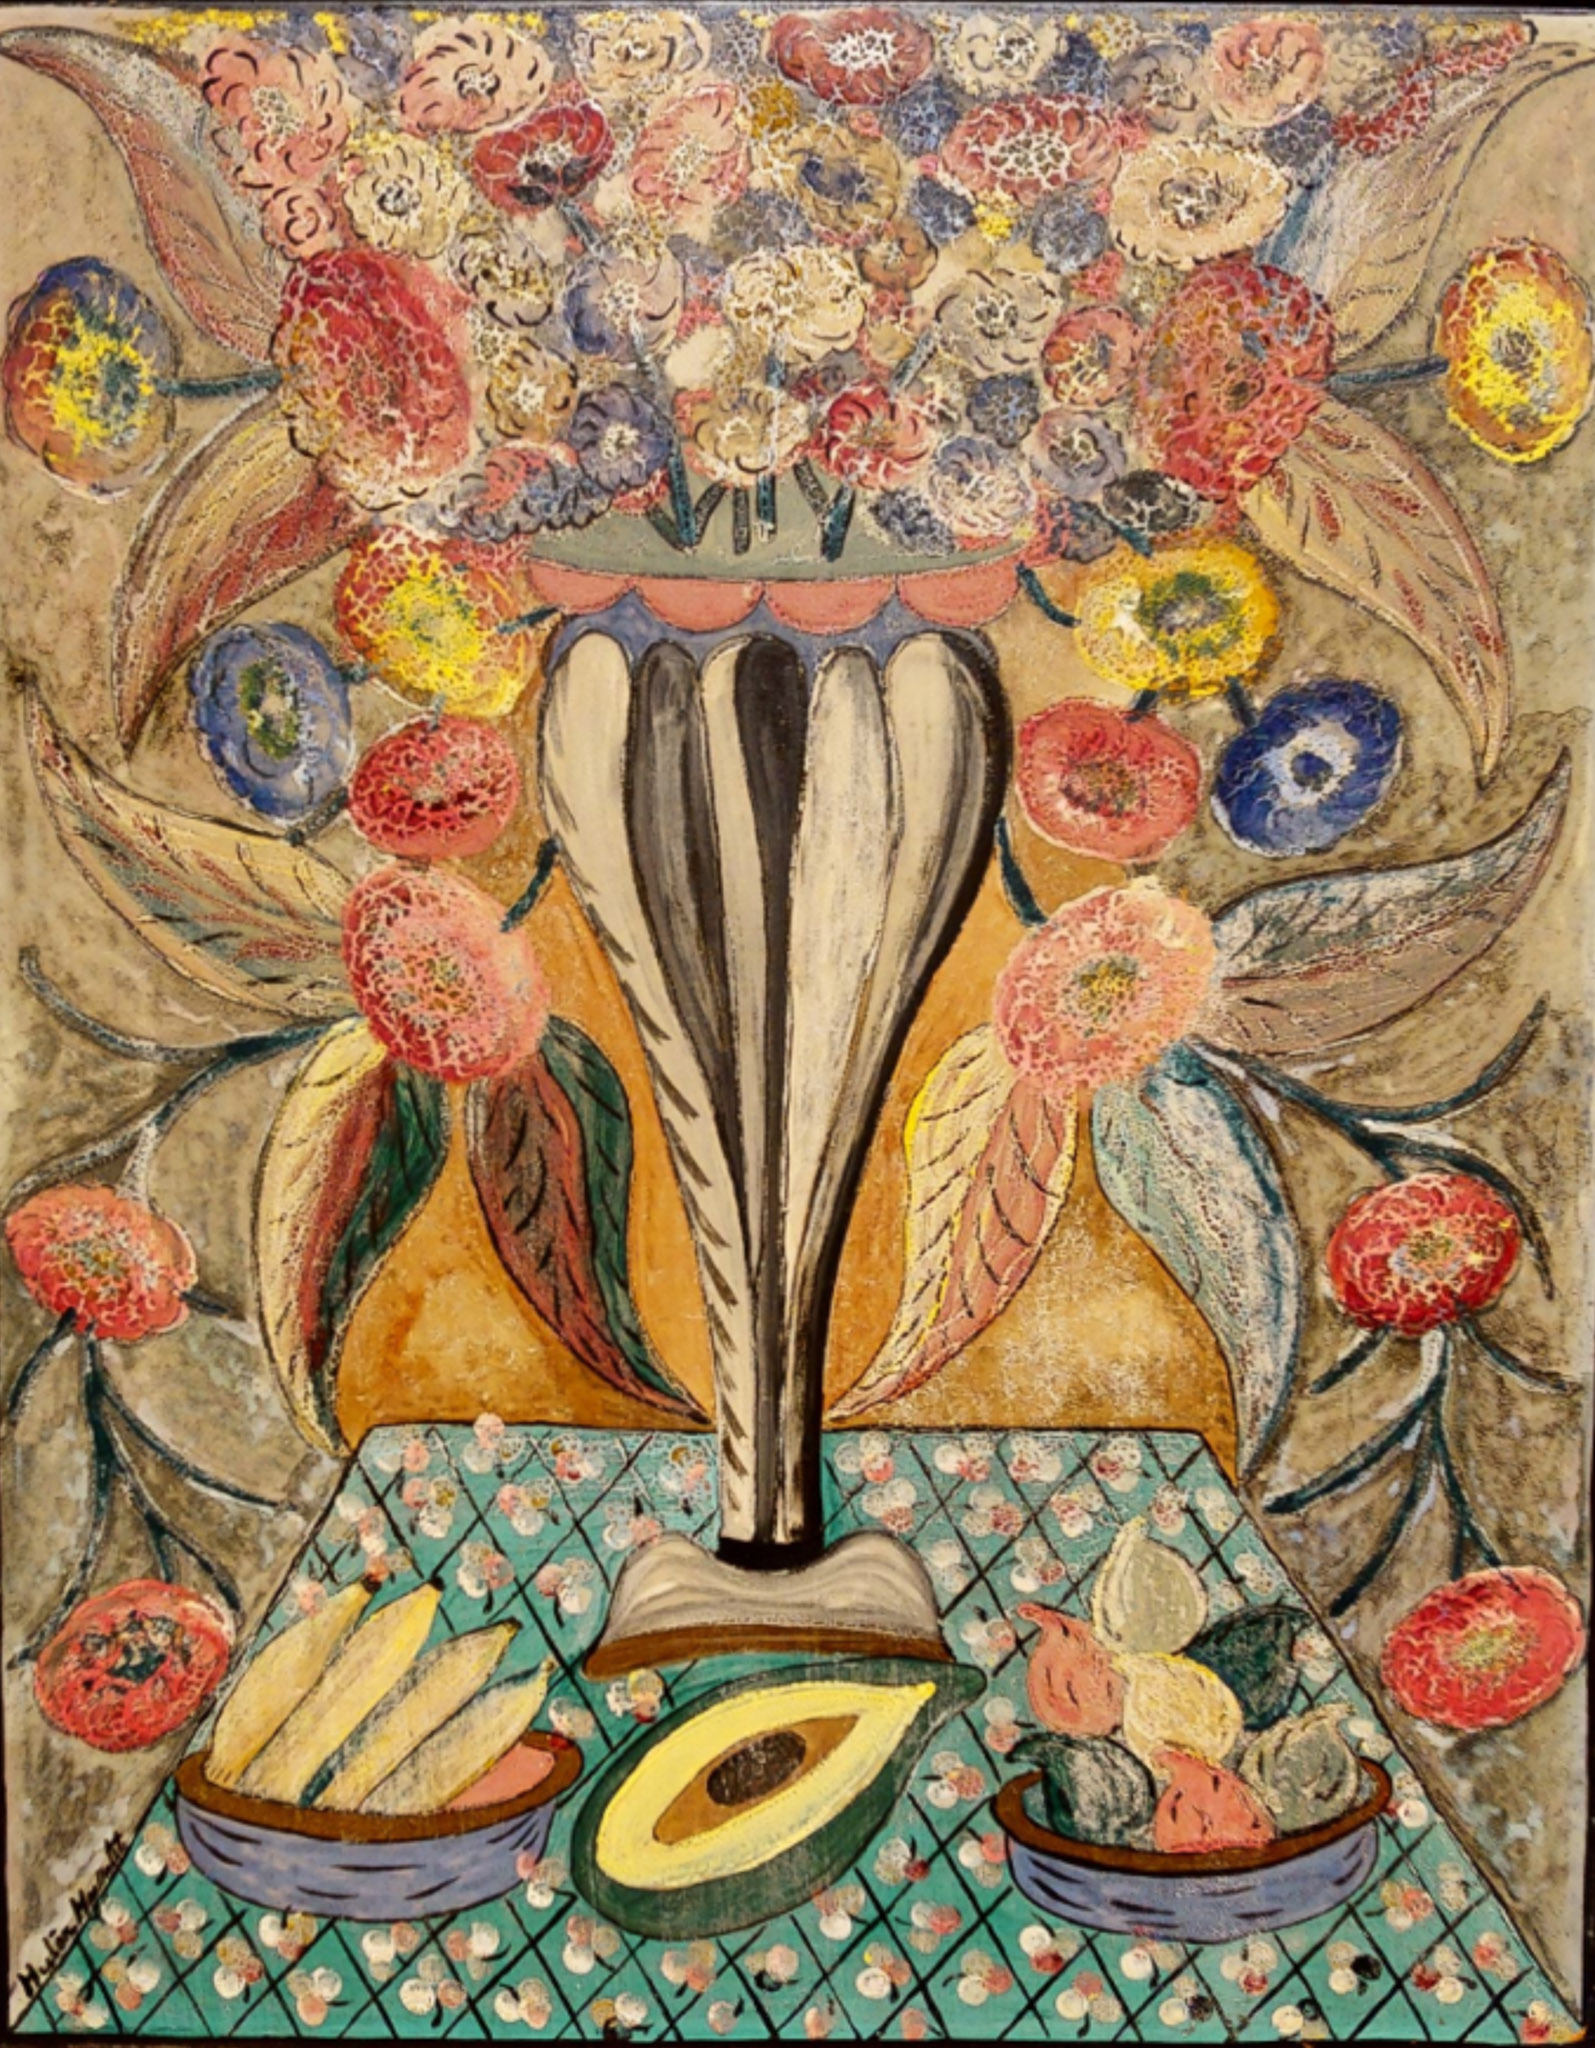 Untitled (Fruit and flowers), 1945-48